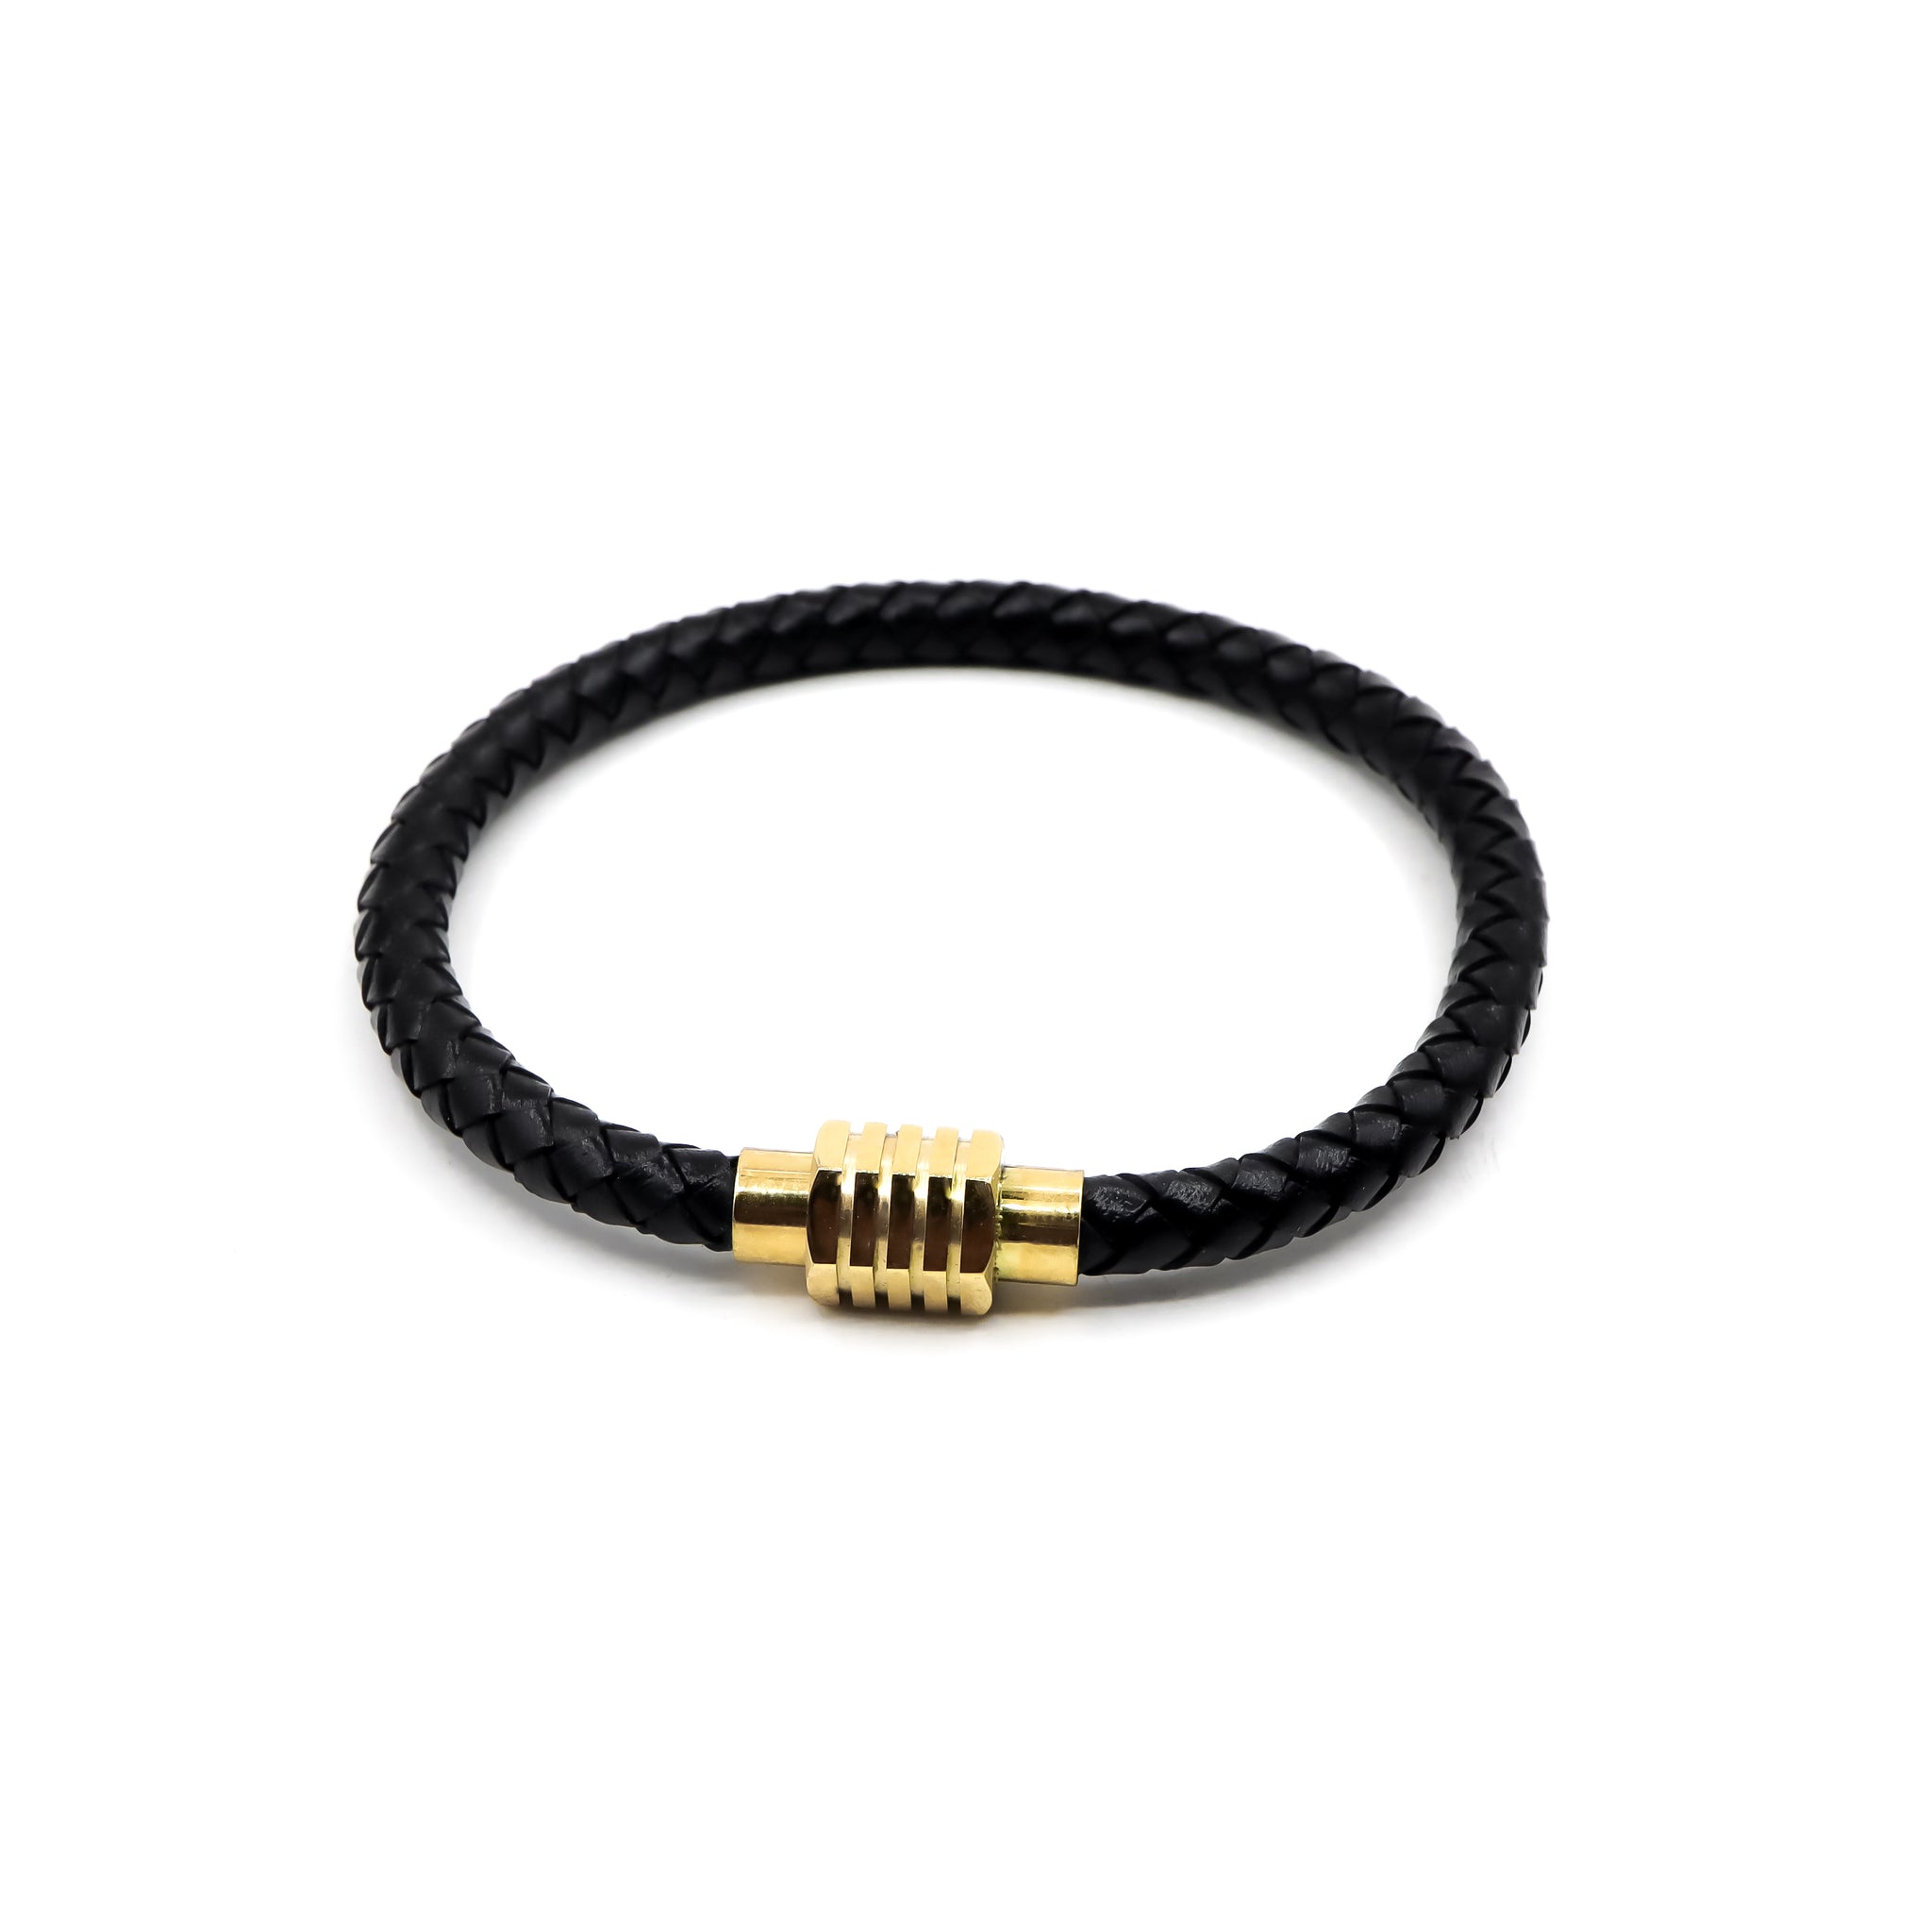 Black Leather and Gold Stainless Steel Men's Bracelet